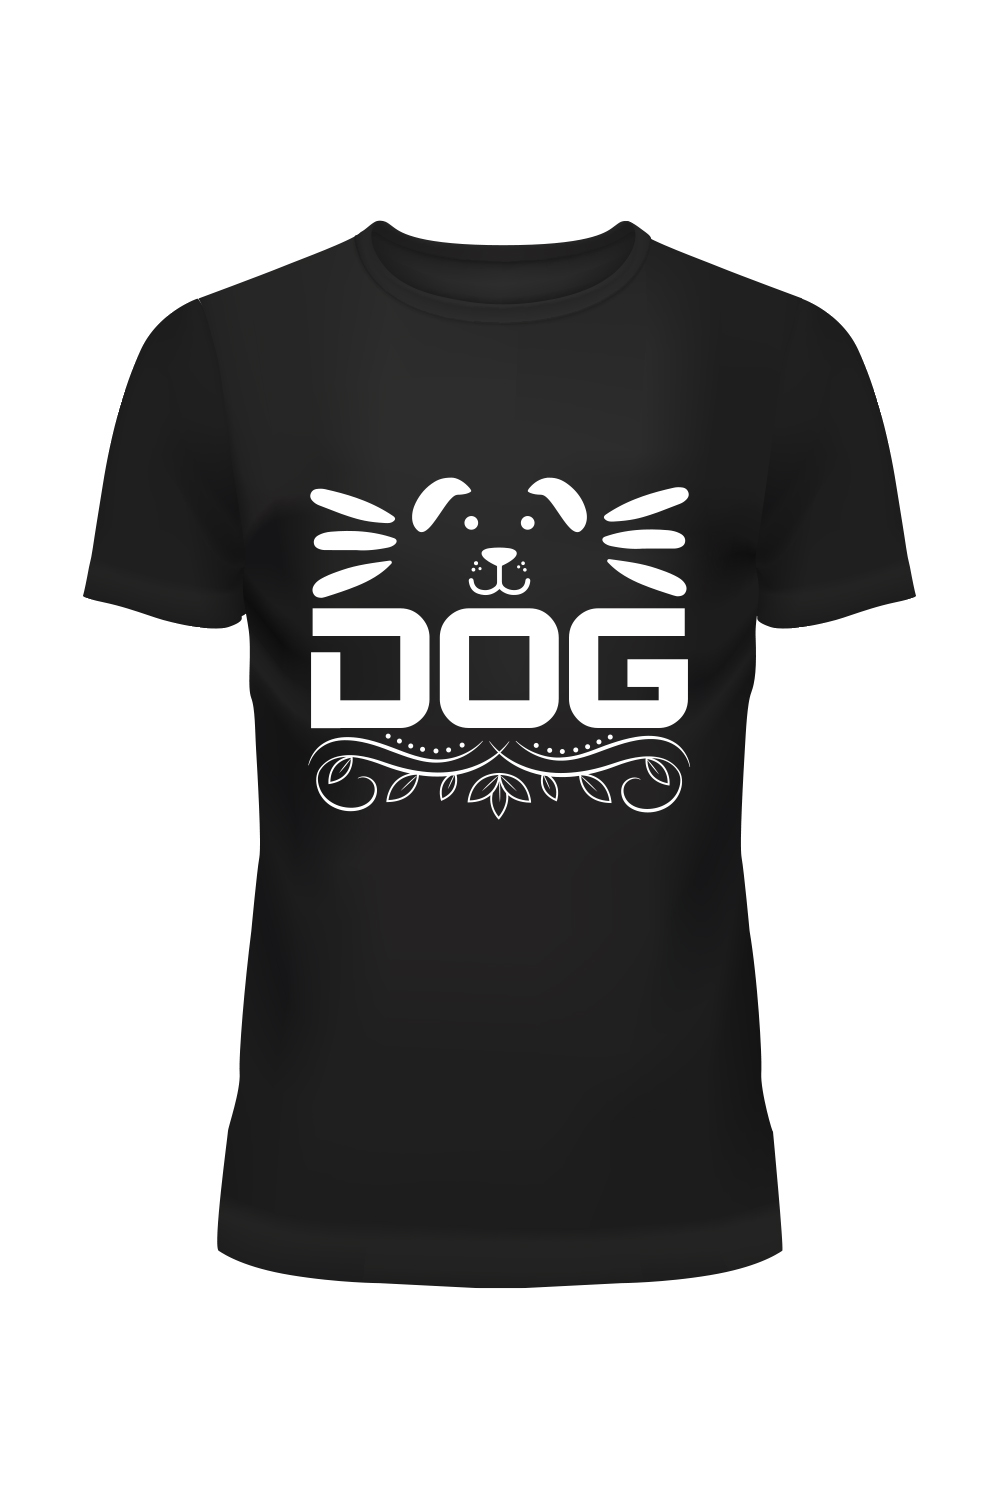 Black t - shirt with the words dog on it.